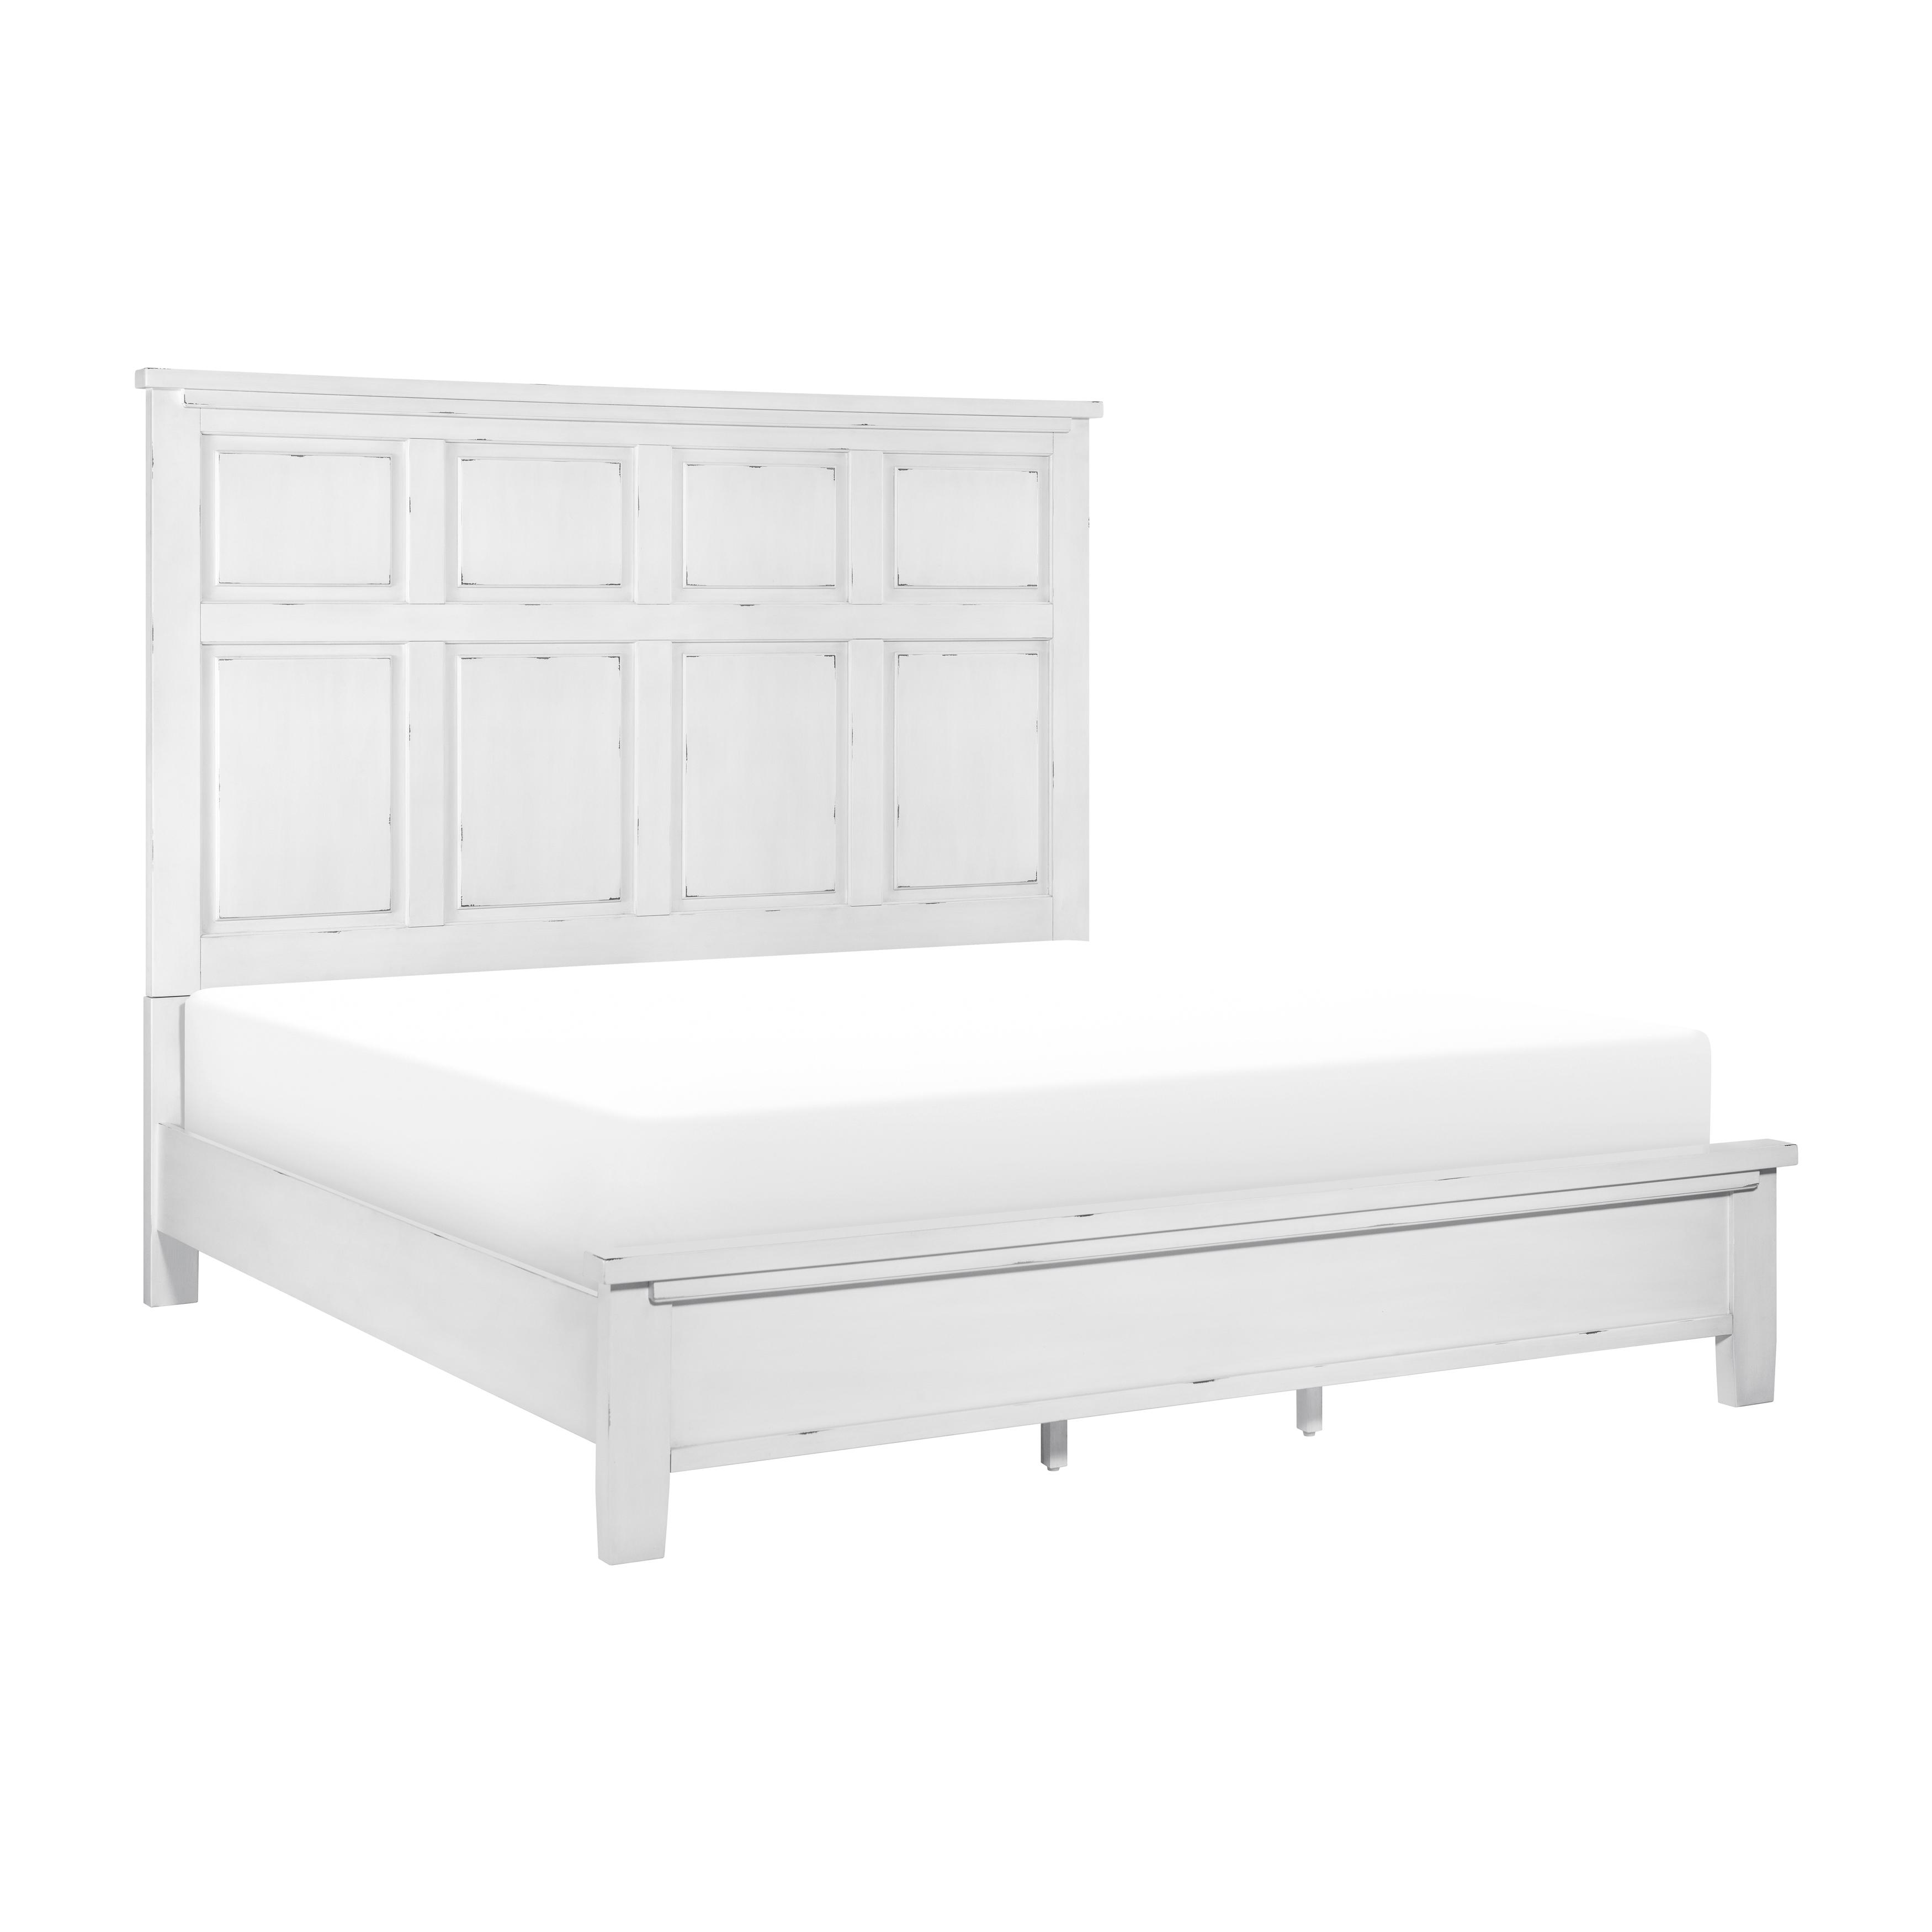 Cottage Panel Bed Laurelville Collection Queen Panel Bed 1447-1-Q 1447-1-Q in Antique White 